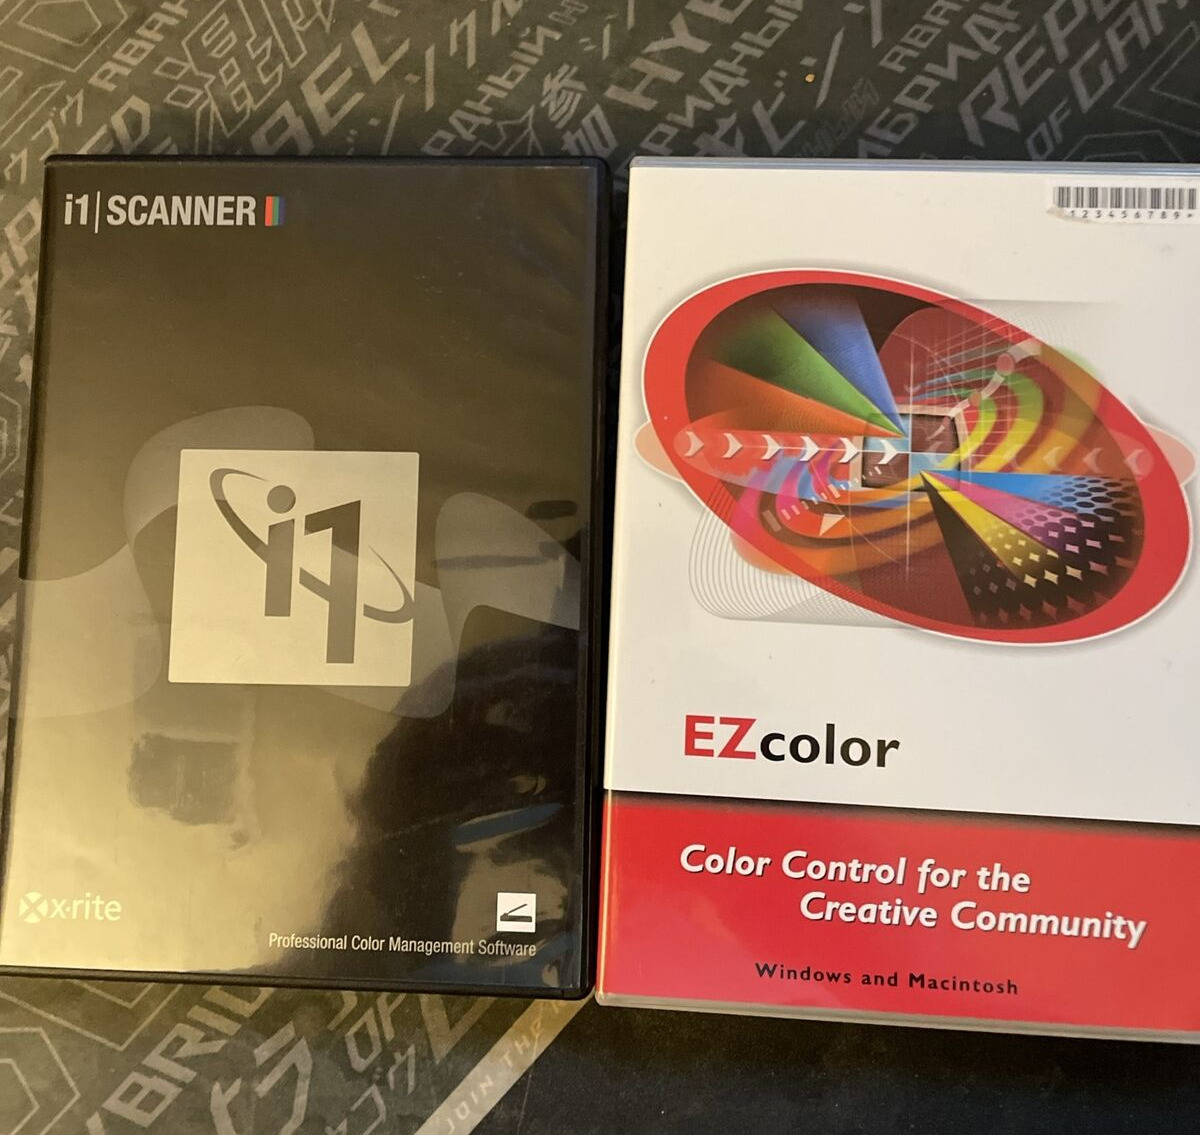 X-Rite i1 Scanner  and EZcolor software for Epson scanner and color standards